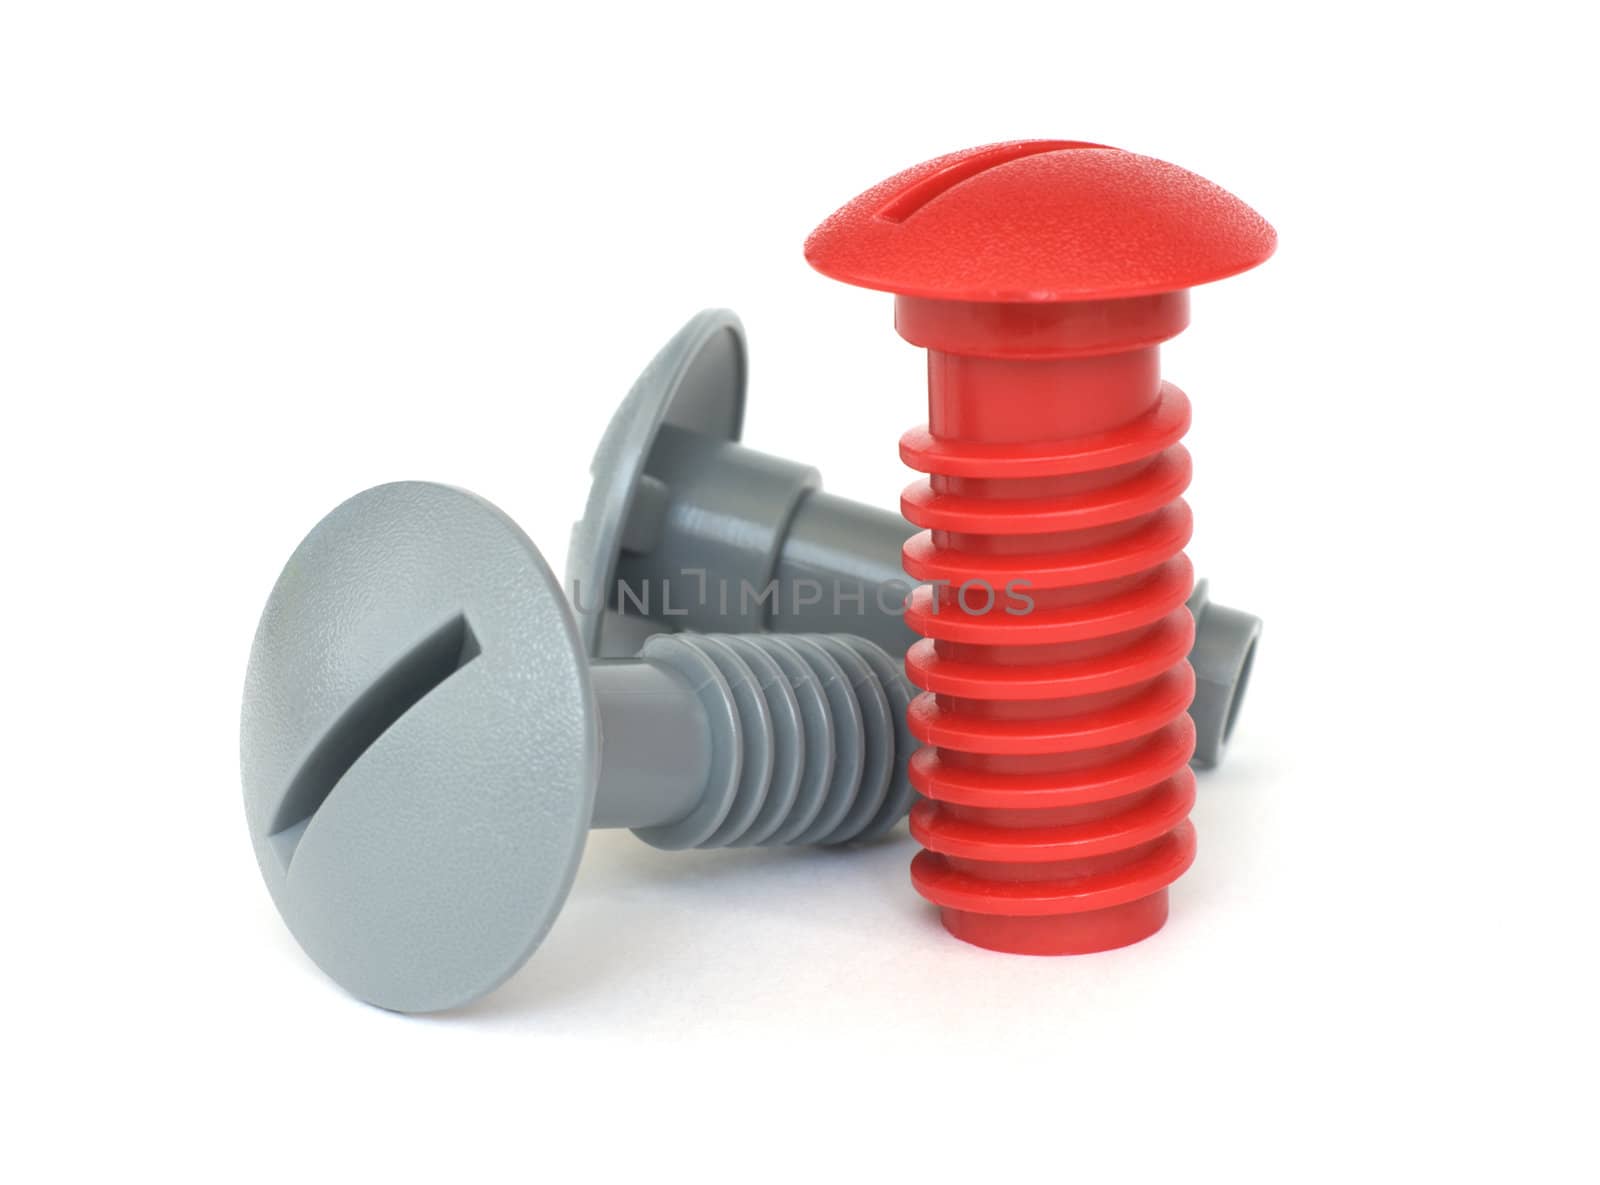 Plastic red and grey bolts, isolated